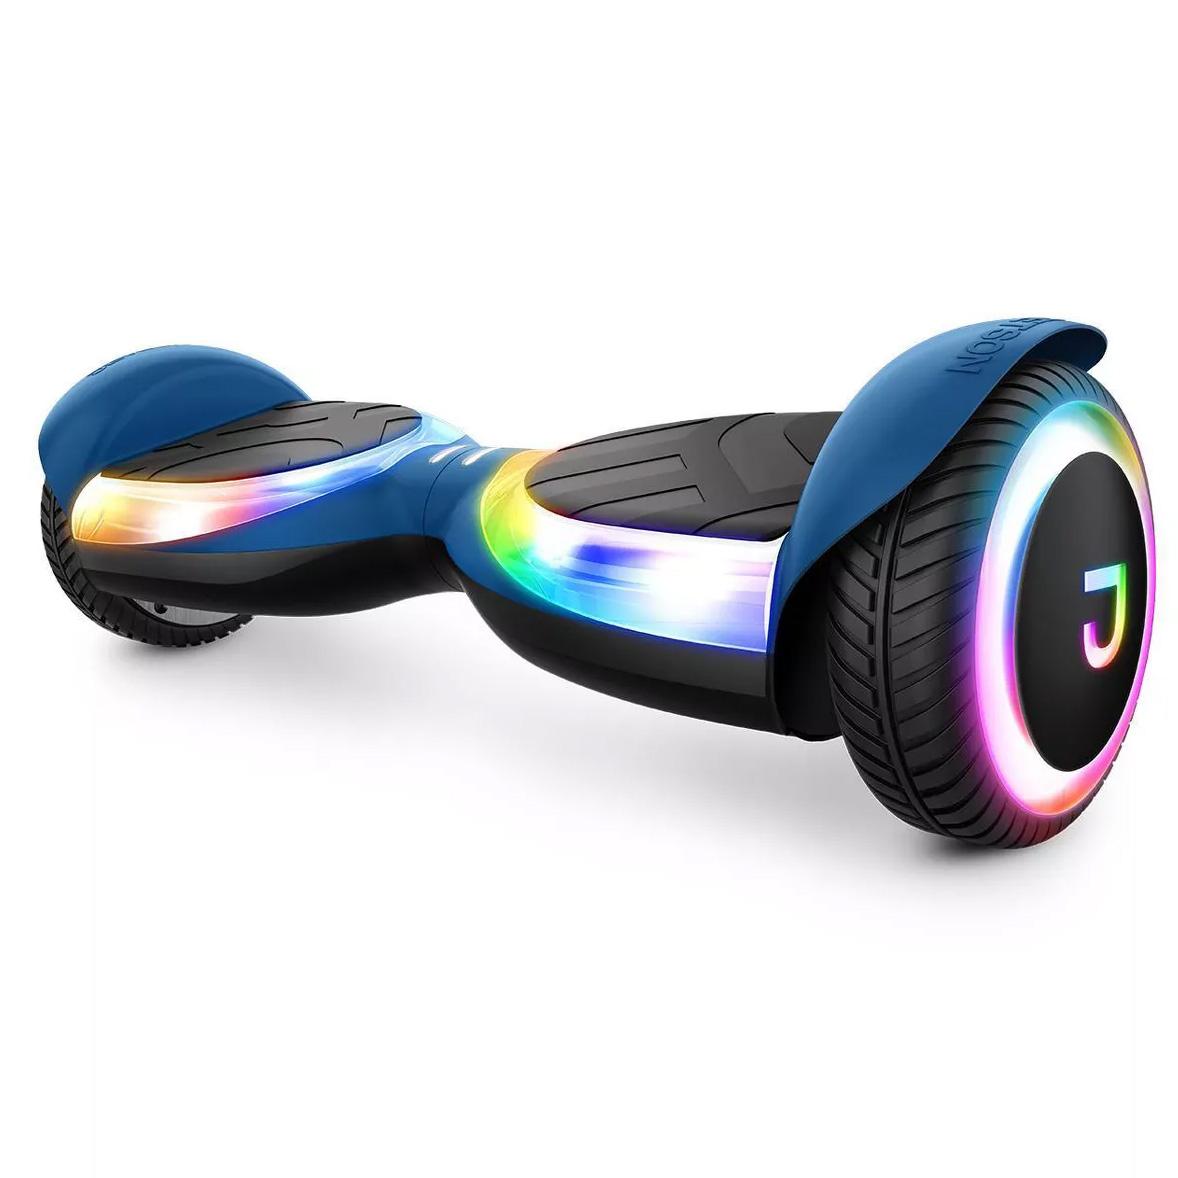 Jetson Sphere Hoverboard for $67.49 Shipped